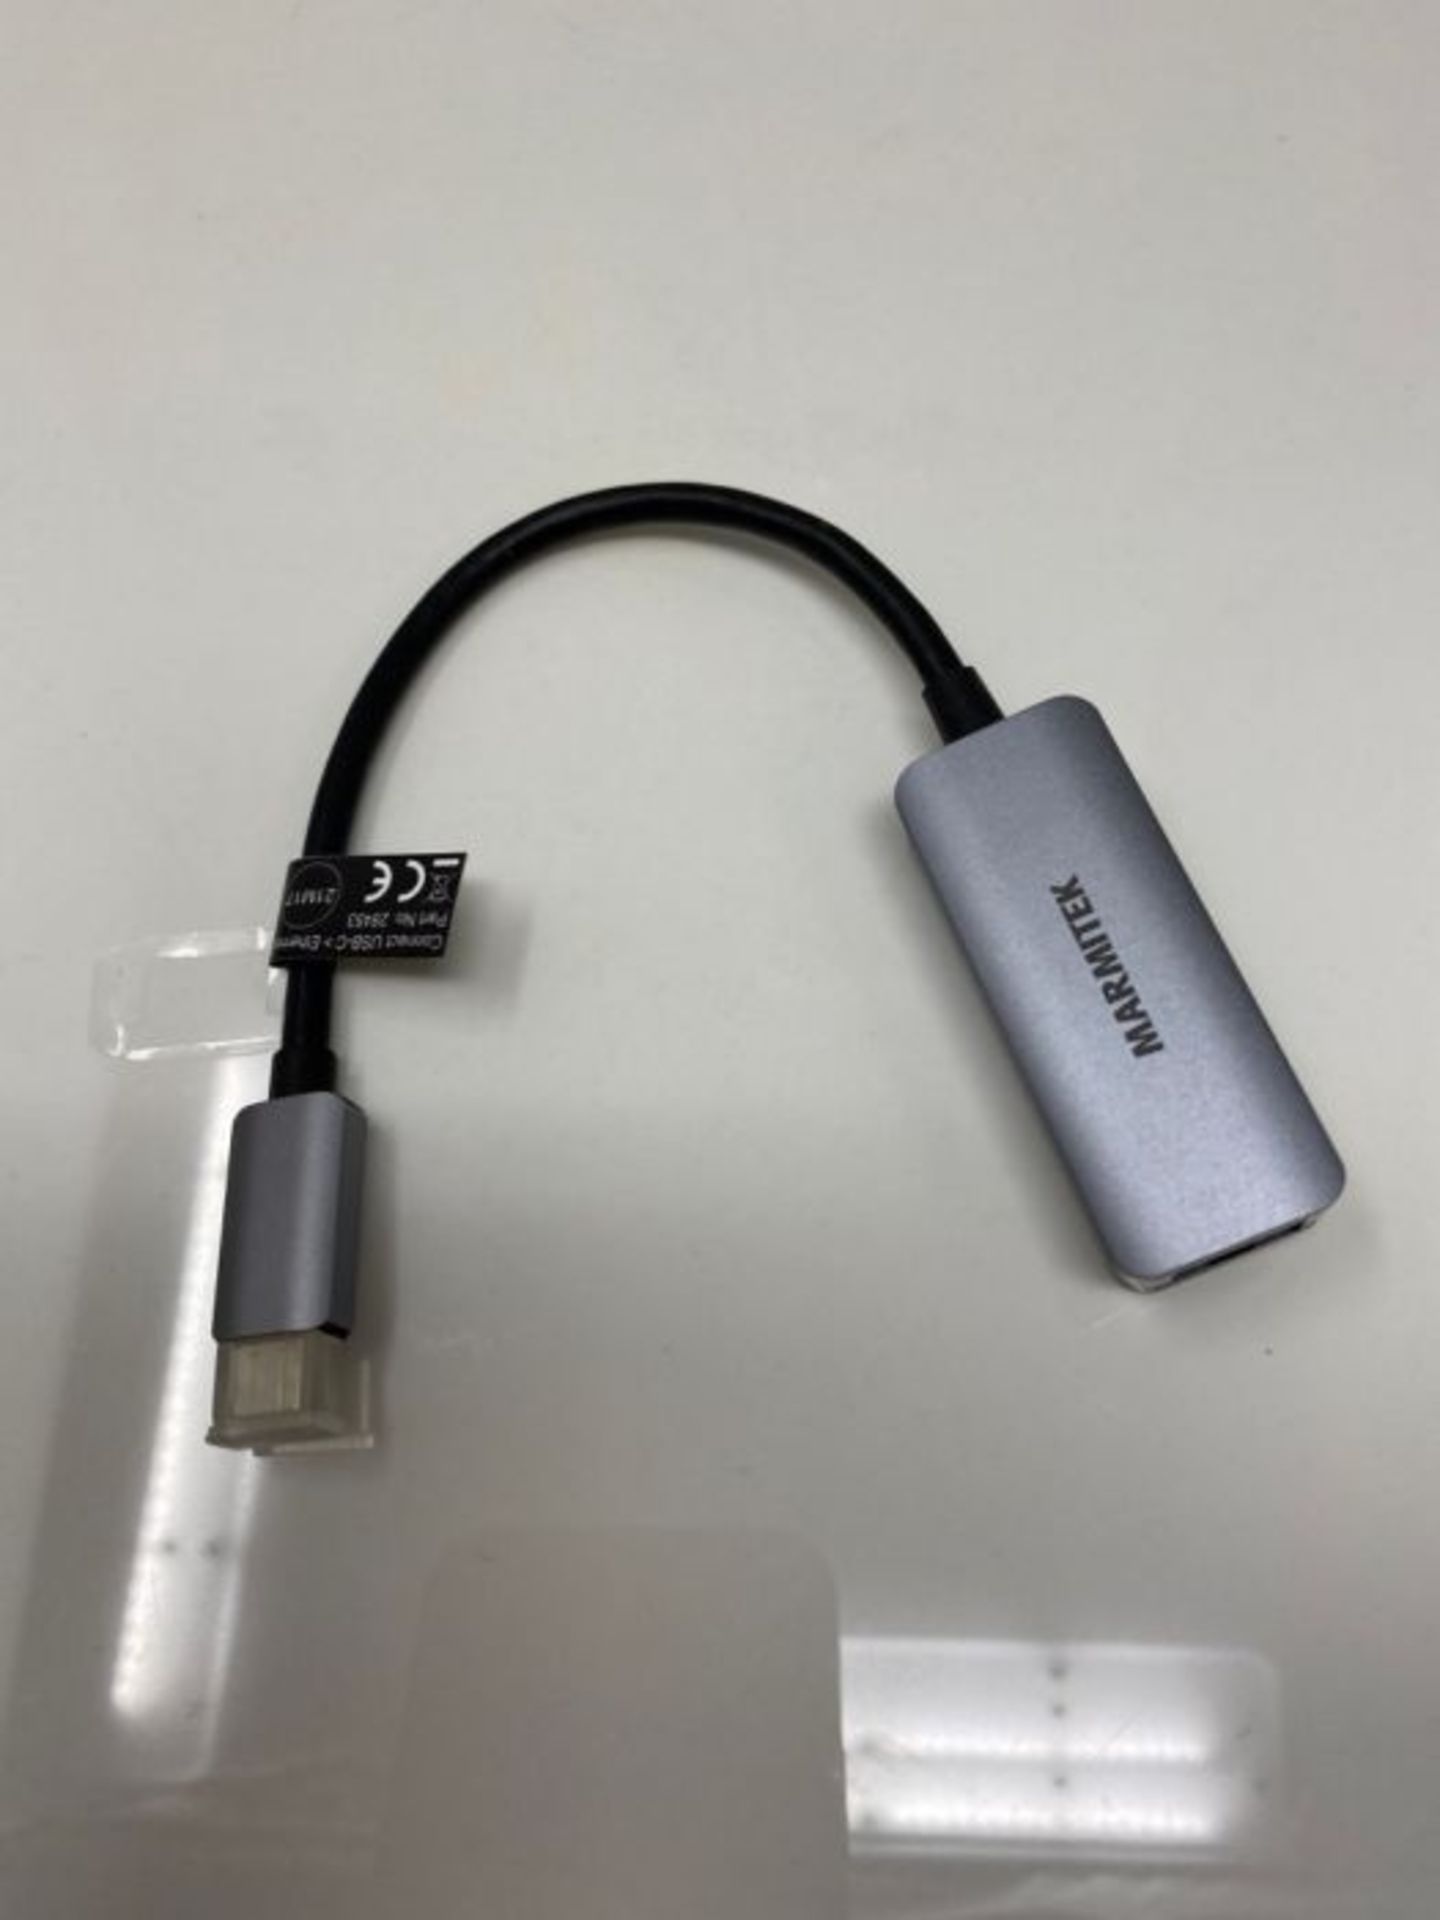 USB C to Ethernet Adapter Cable - Marmitek UE24 - Connect Thunderbolt to LAN - Connect - Image 3 of 3